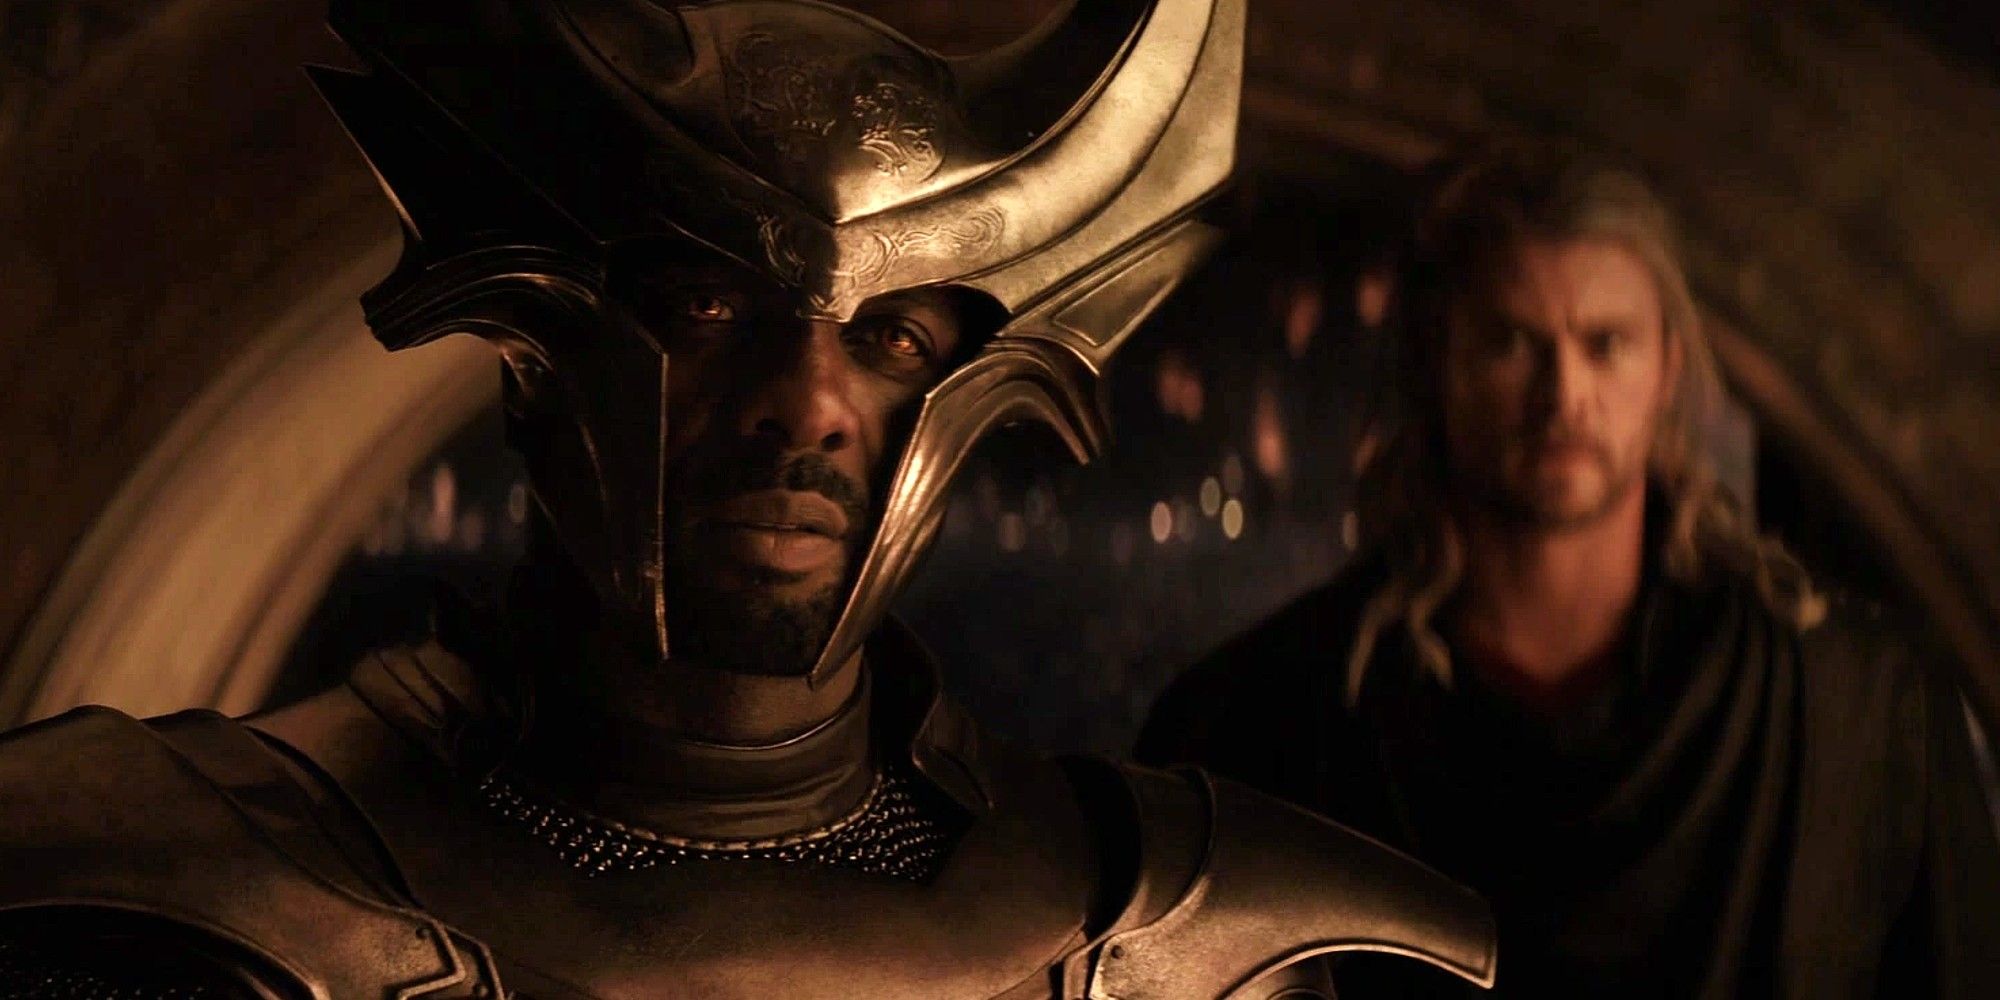 Idris Elba and Chris Hemsworth as Heimdall and Thor in 'Thor'